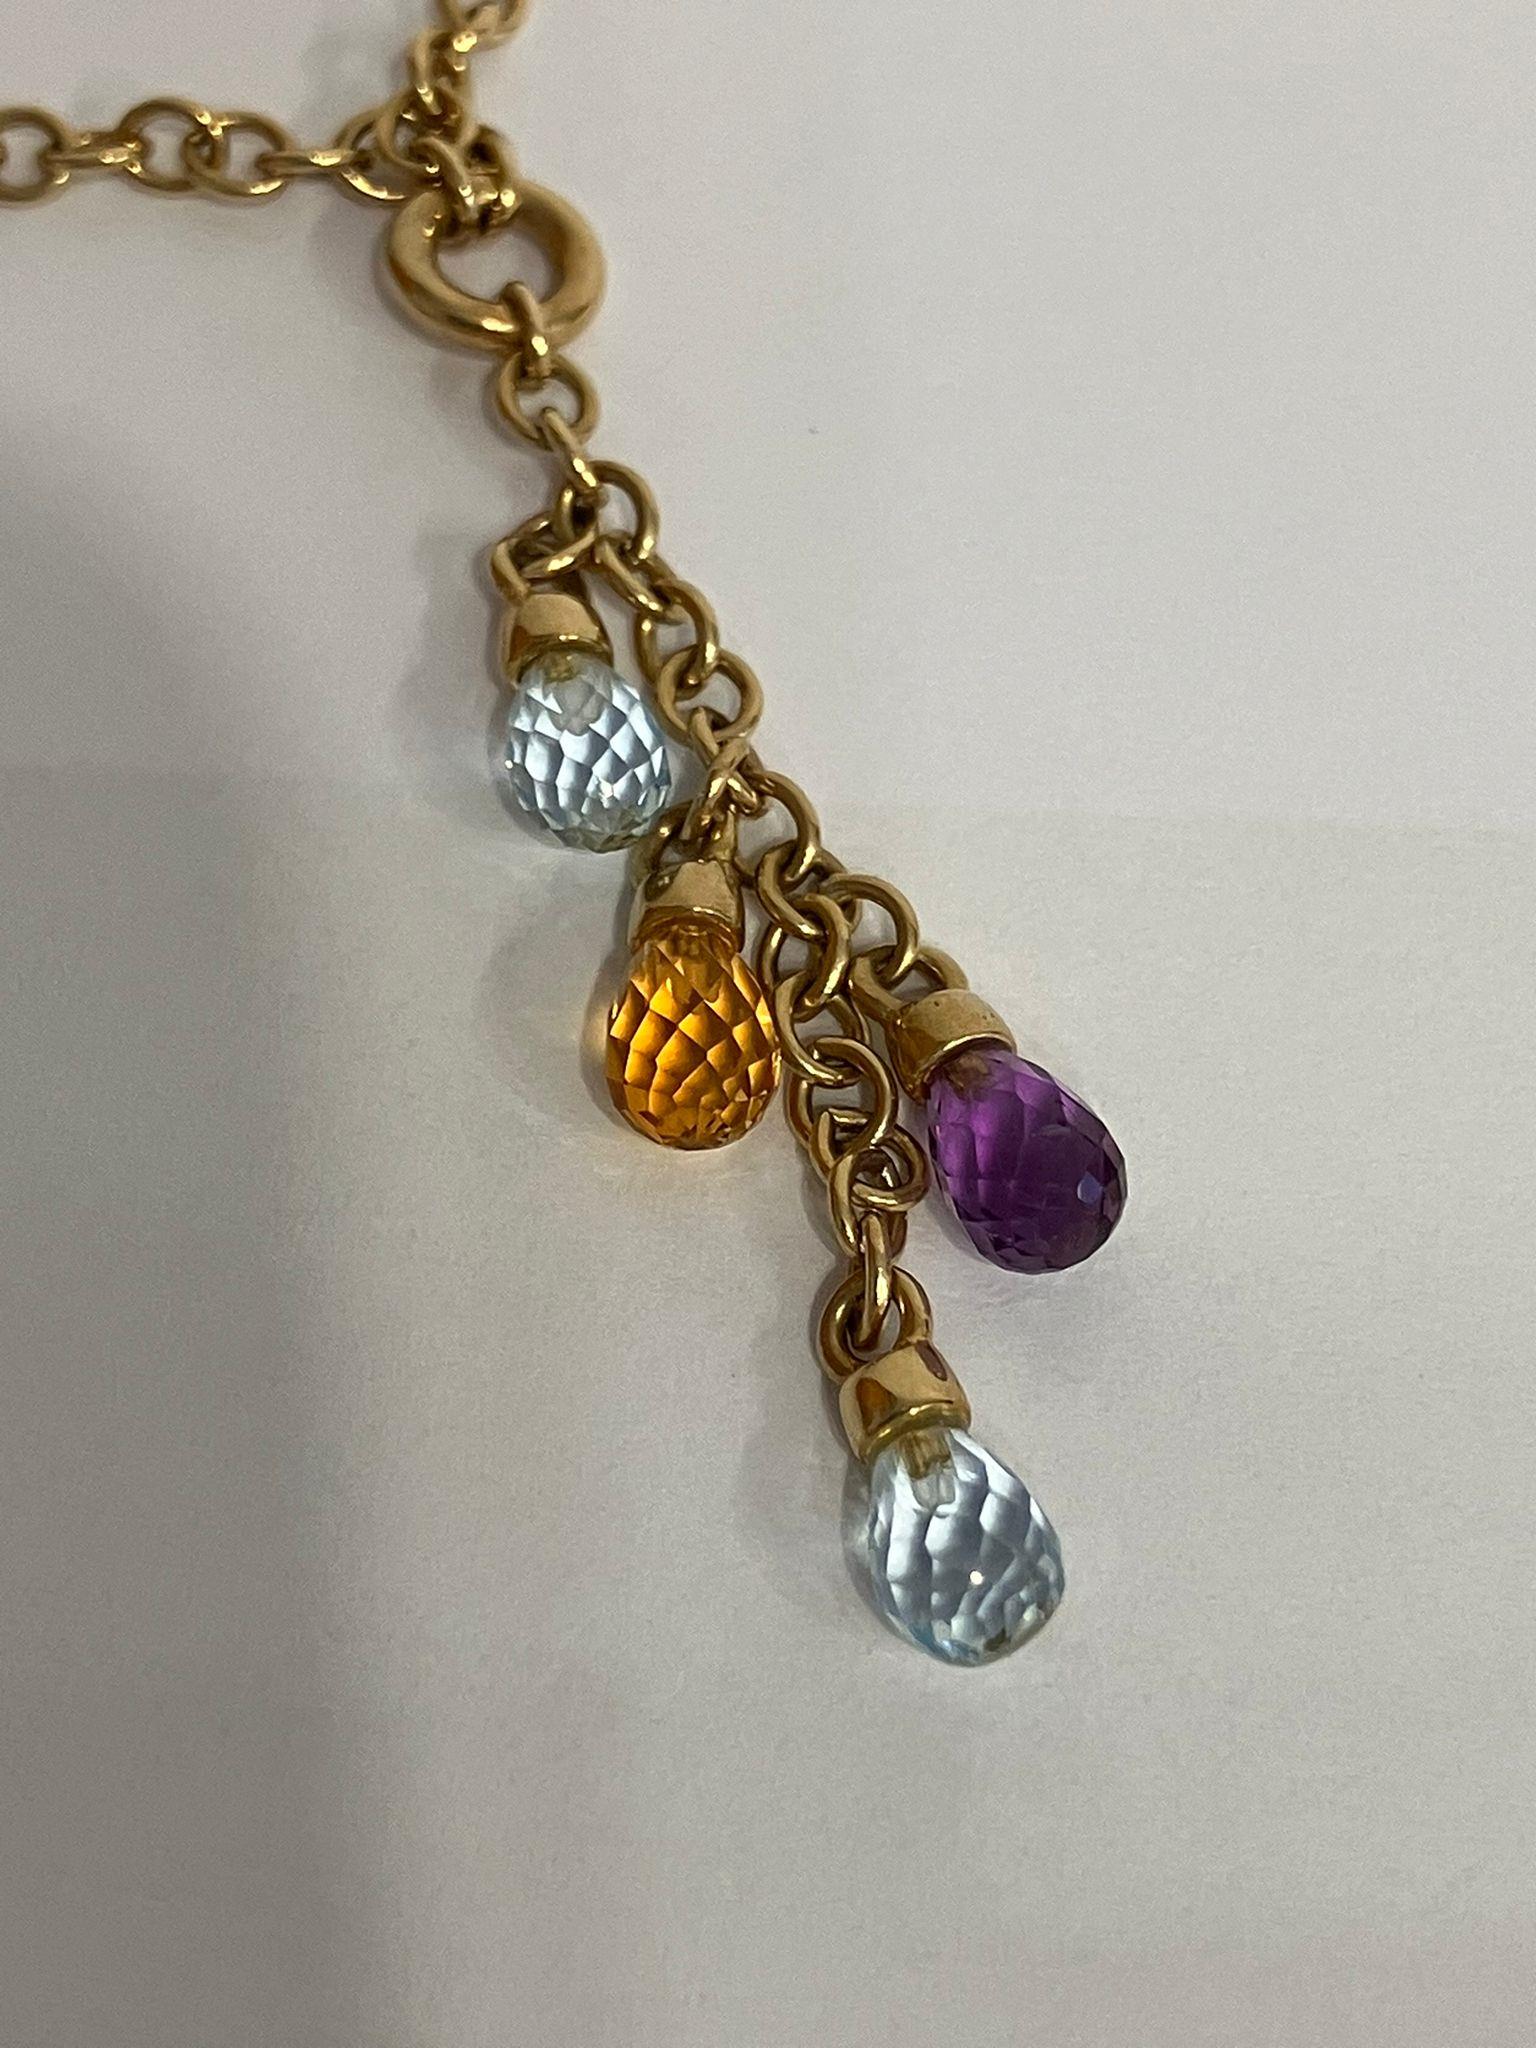 Fabulous 9 carat GOLD CHAIN LINK NECKLACE with gemstone drops. Gemstones to include Amethyst, - Image 3 of 3